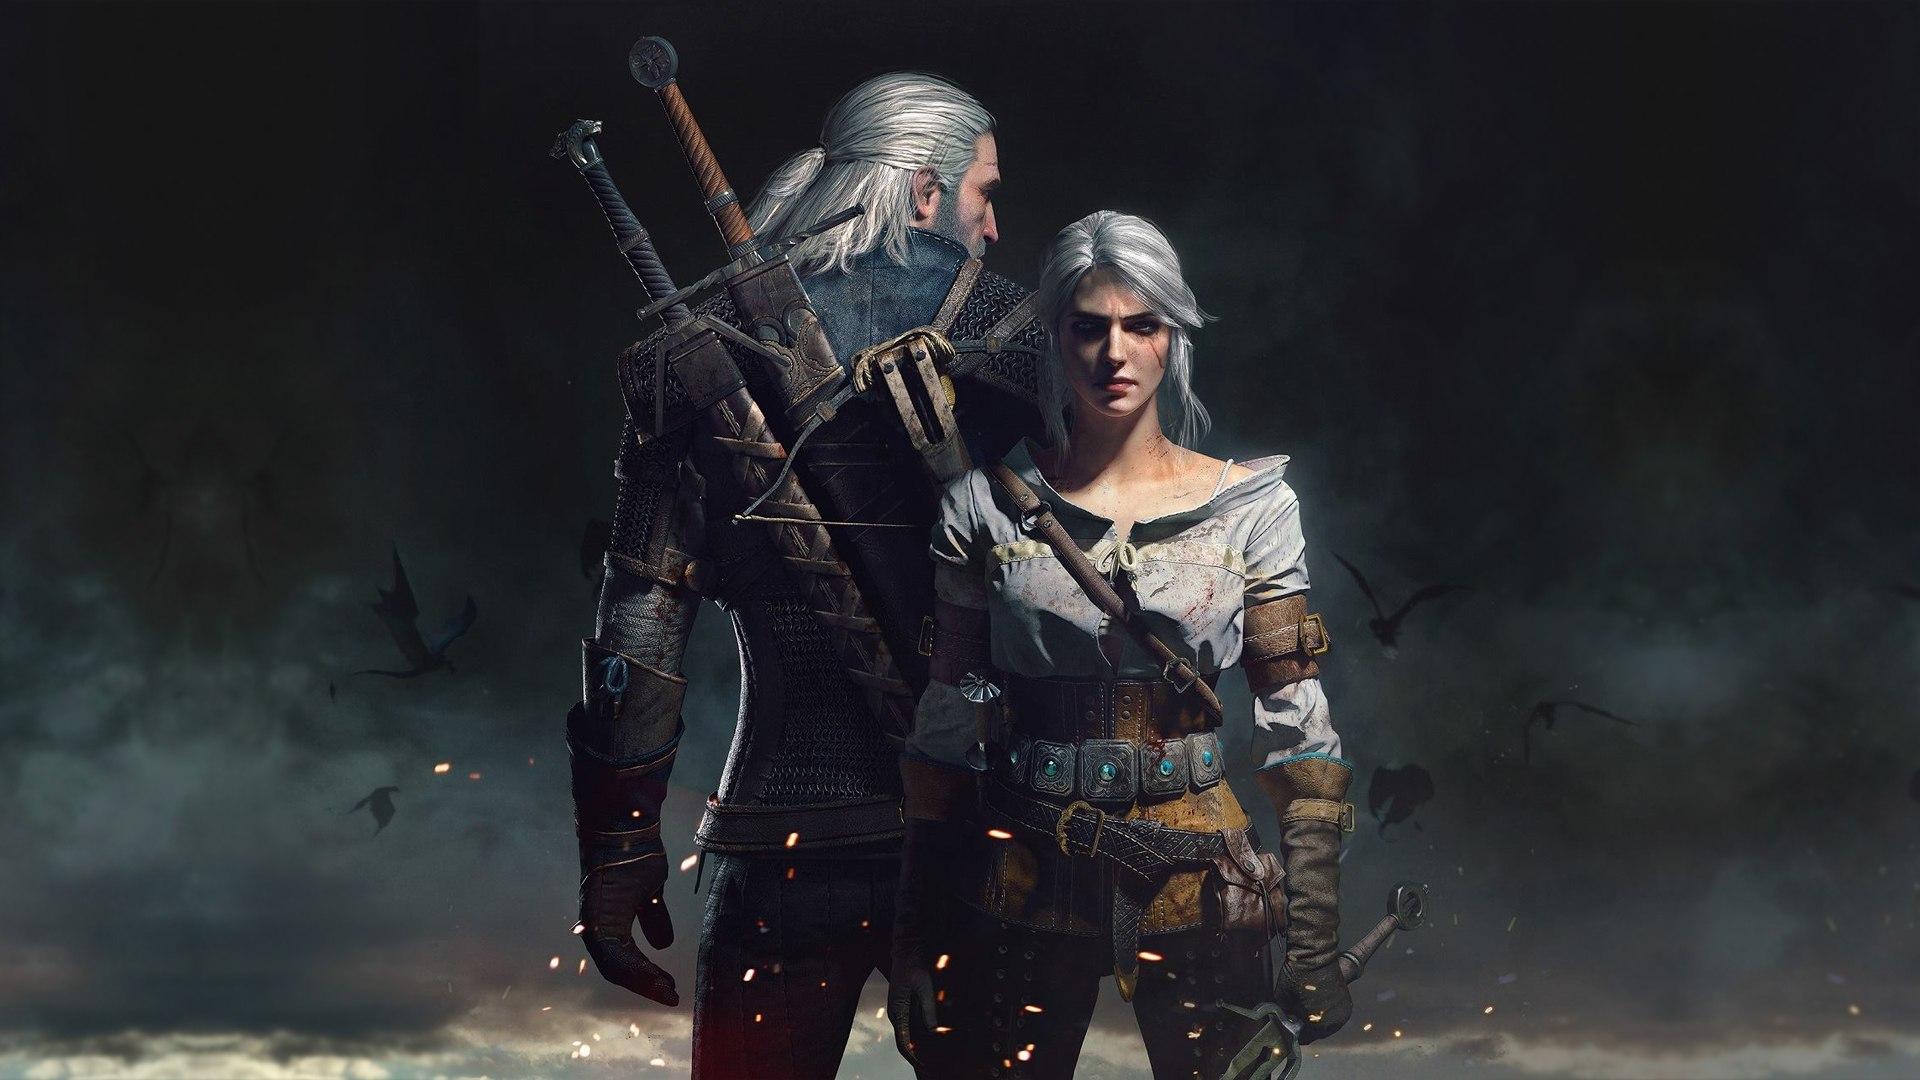 Download 1920x1080 HD Wallpaper the witcher 3: wild hunt